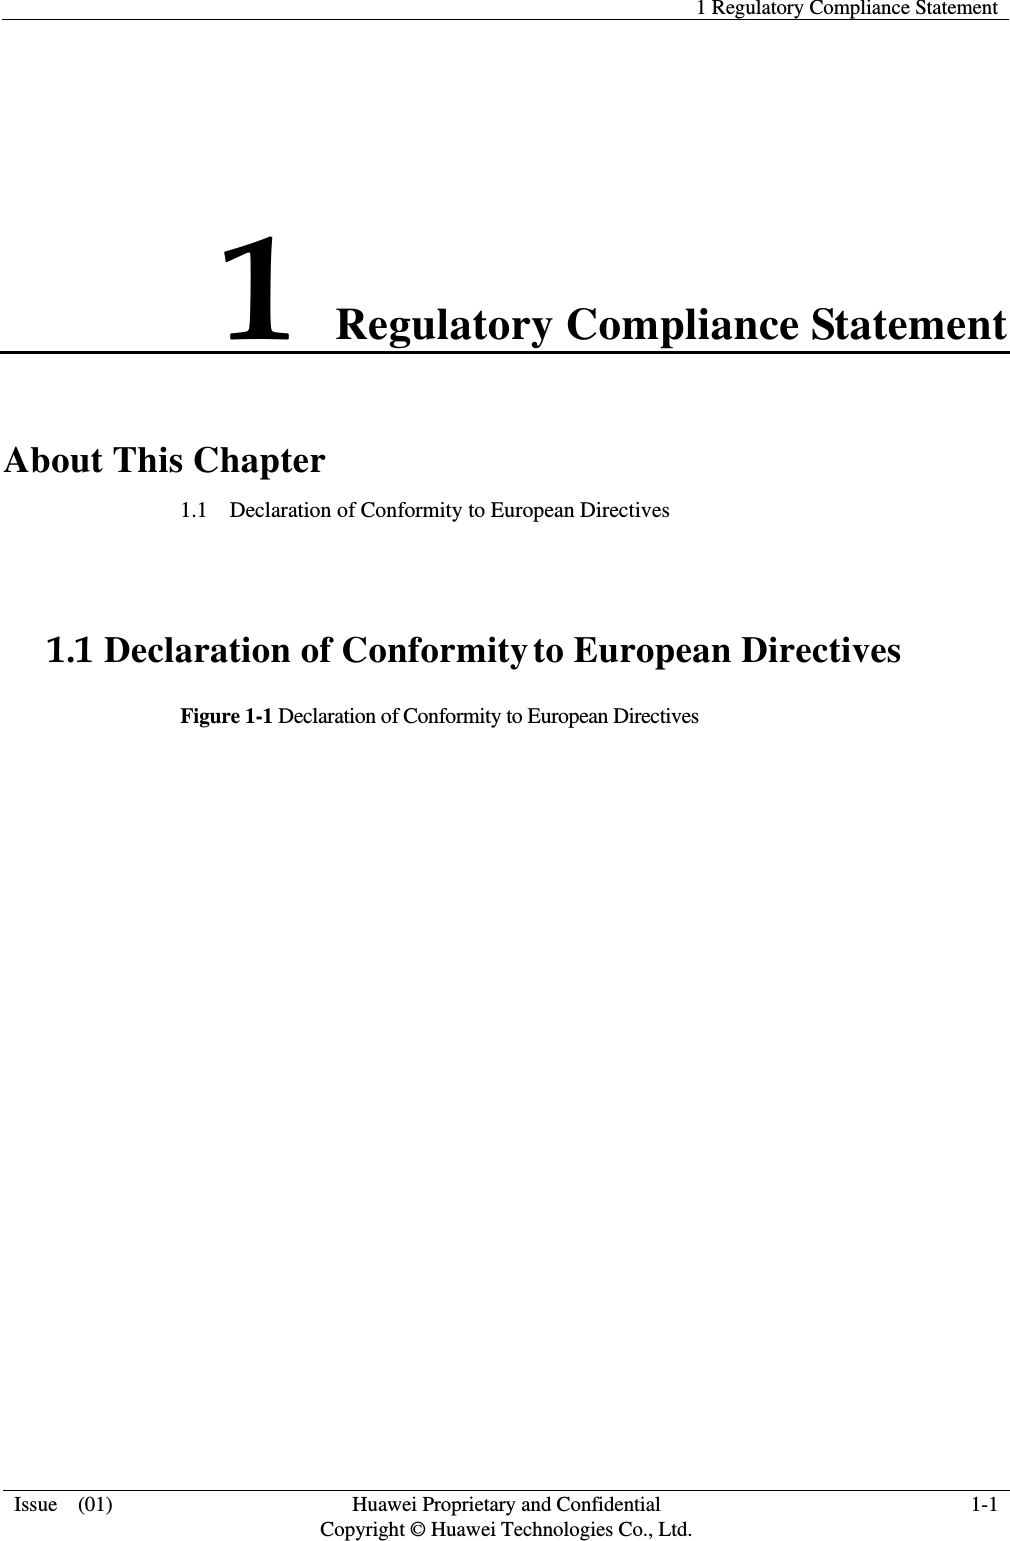   1 Regulatory Compliance Statement   Issue    (01)  Huawei Proprietary and Confidential                                     Copyright © Huawei Technologies Co., Ltd.  1-1  1 Regulatory Compliance Statement About This Chapter 1.1    Declaration of Conformity to European Directives  1.1 Declaration of Conformity to European Directives Figure 1-1 Declaration of Conformity to European Directives    